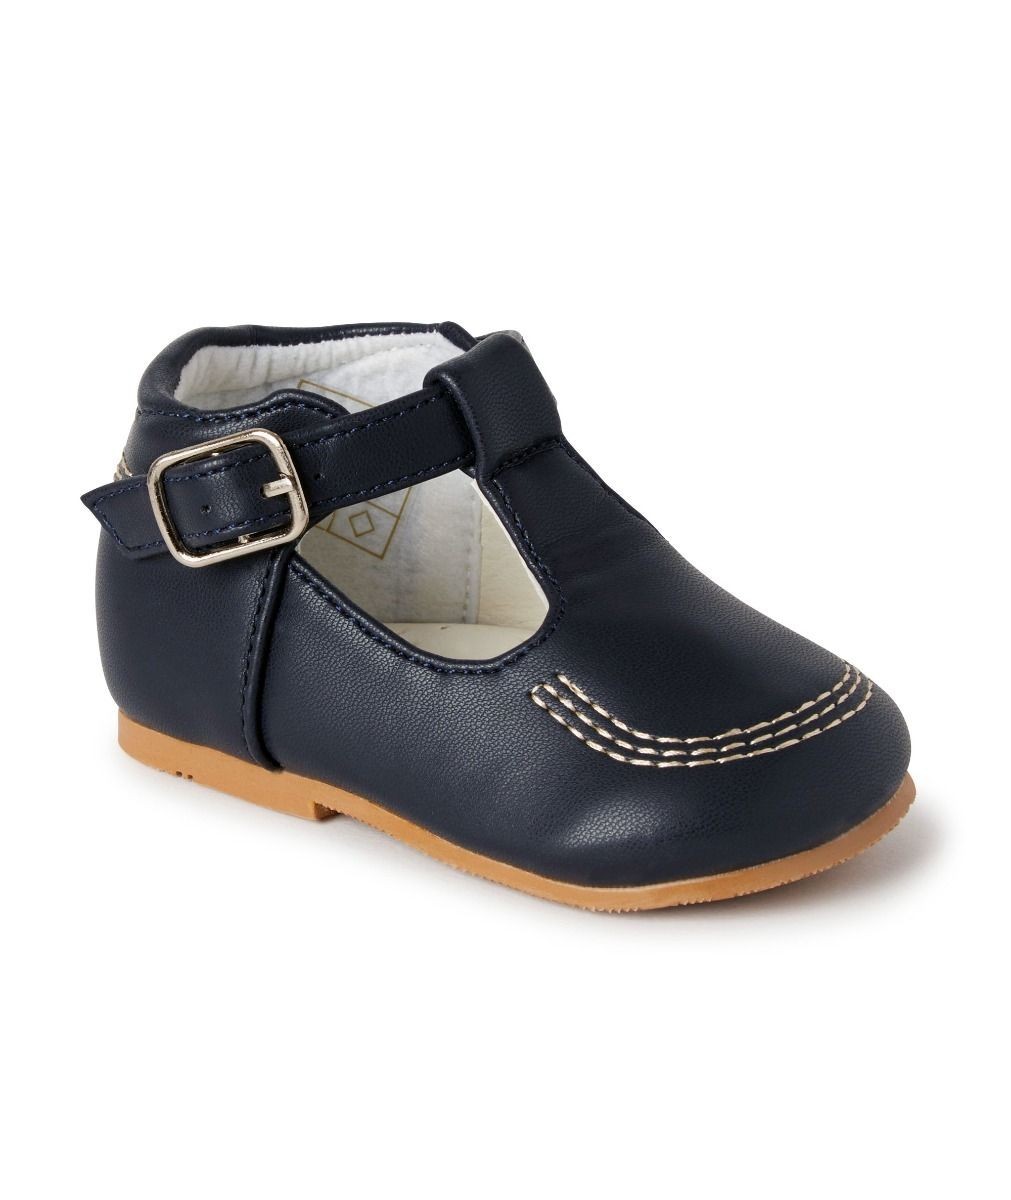 Baby & Boys Buckled Leather Shoes – TEDDY - Navy Blue